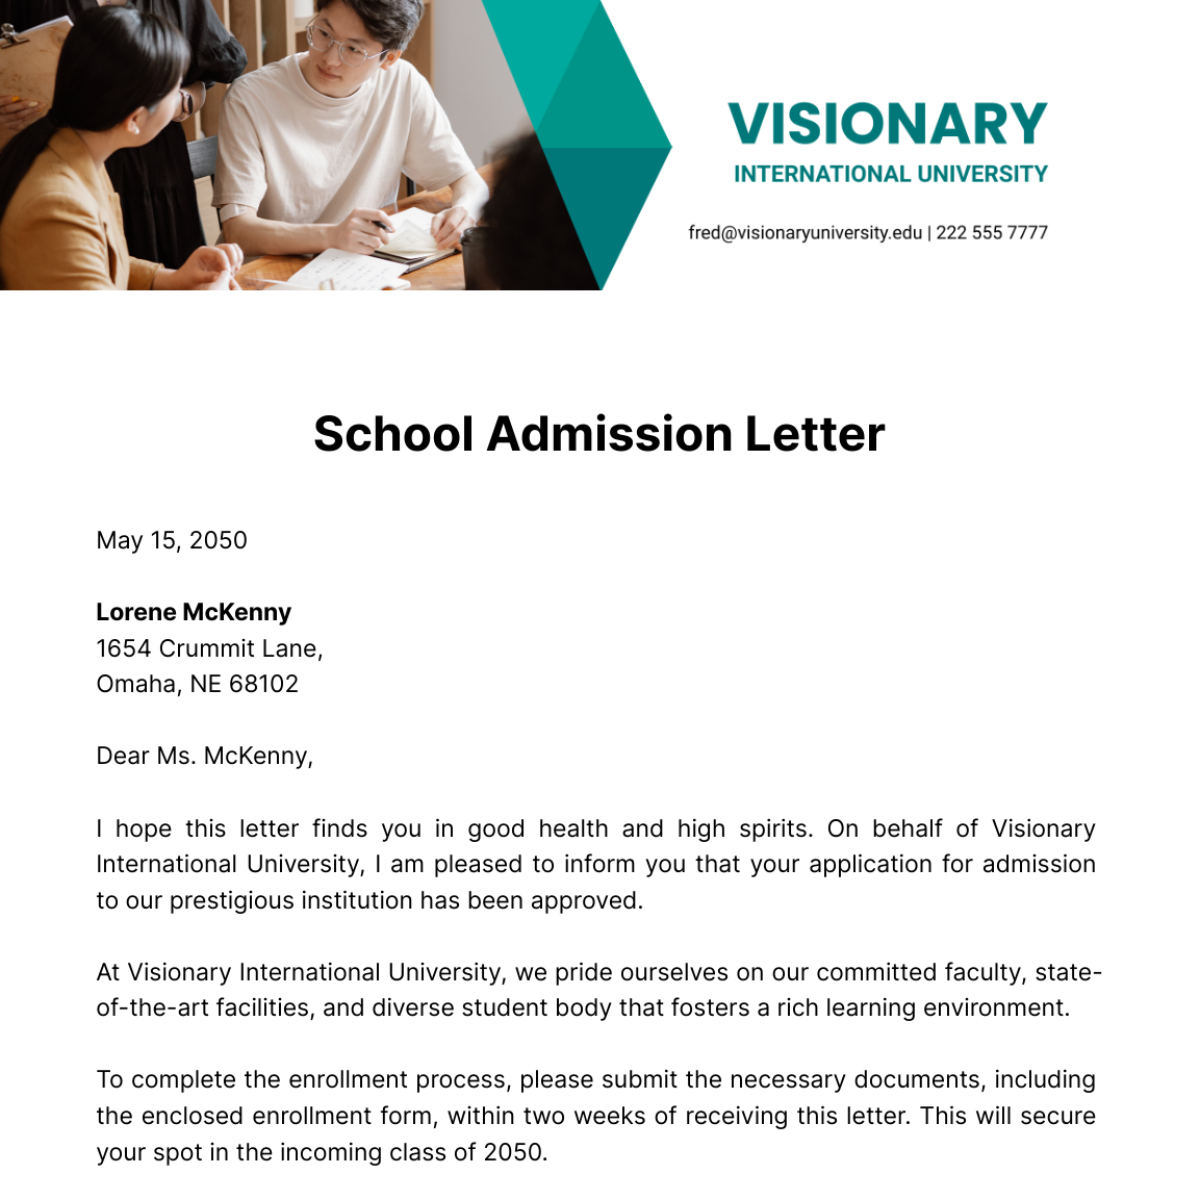 School Admission Letter Template